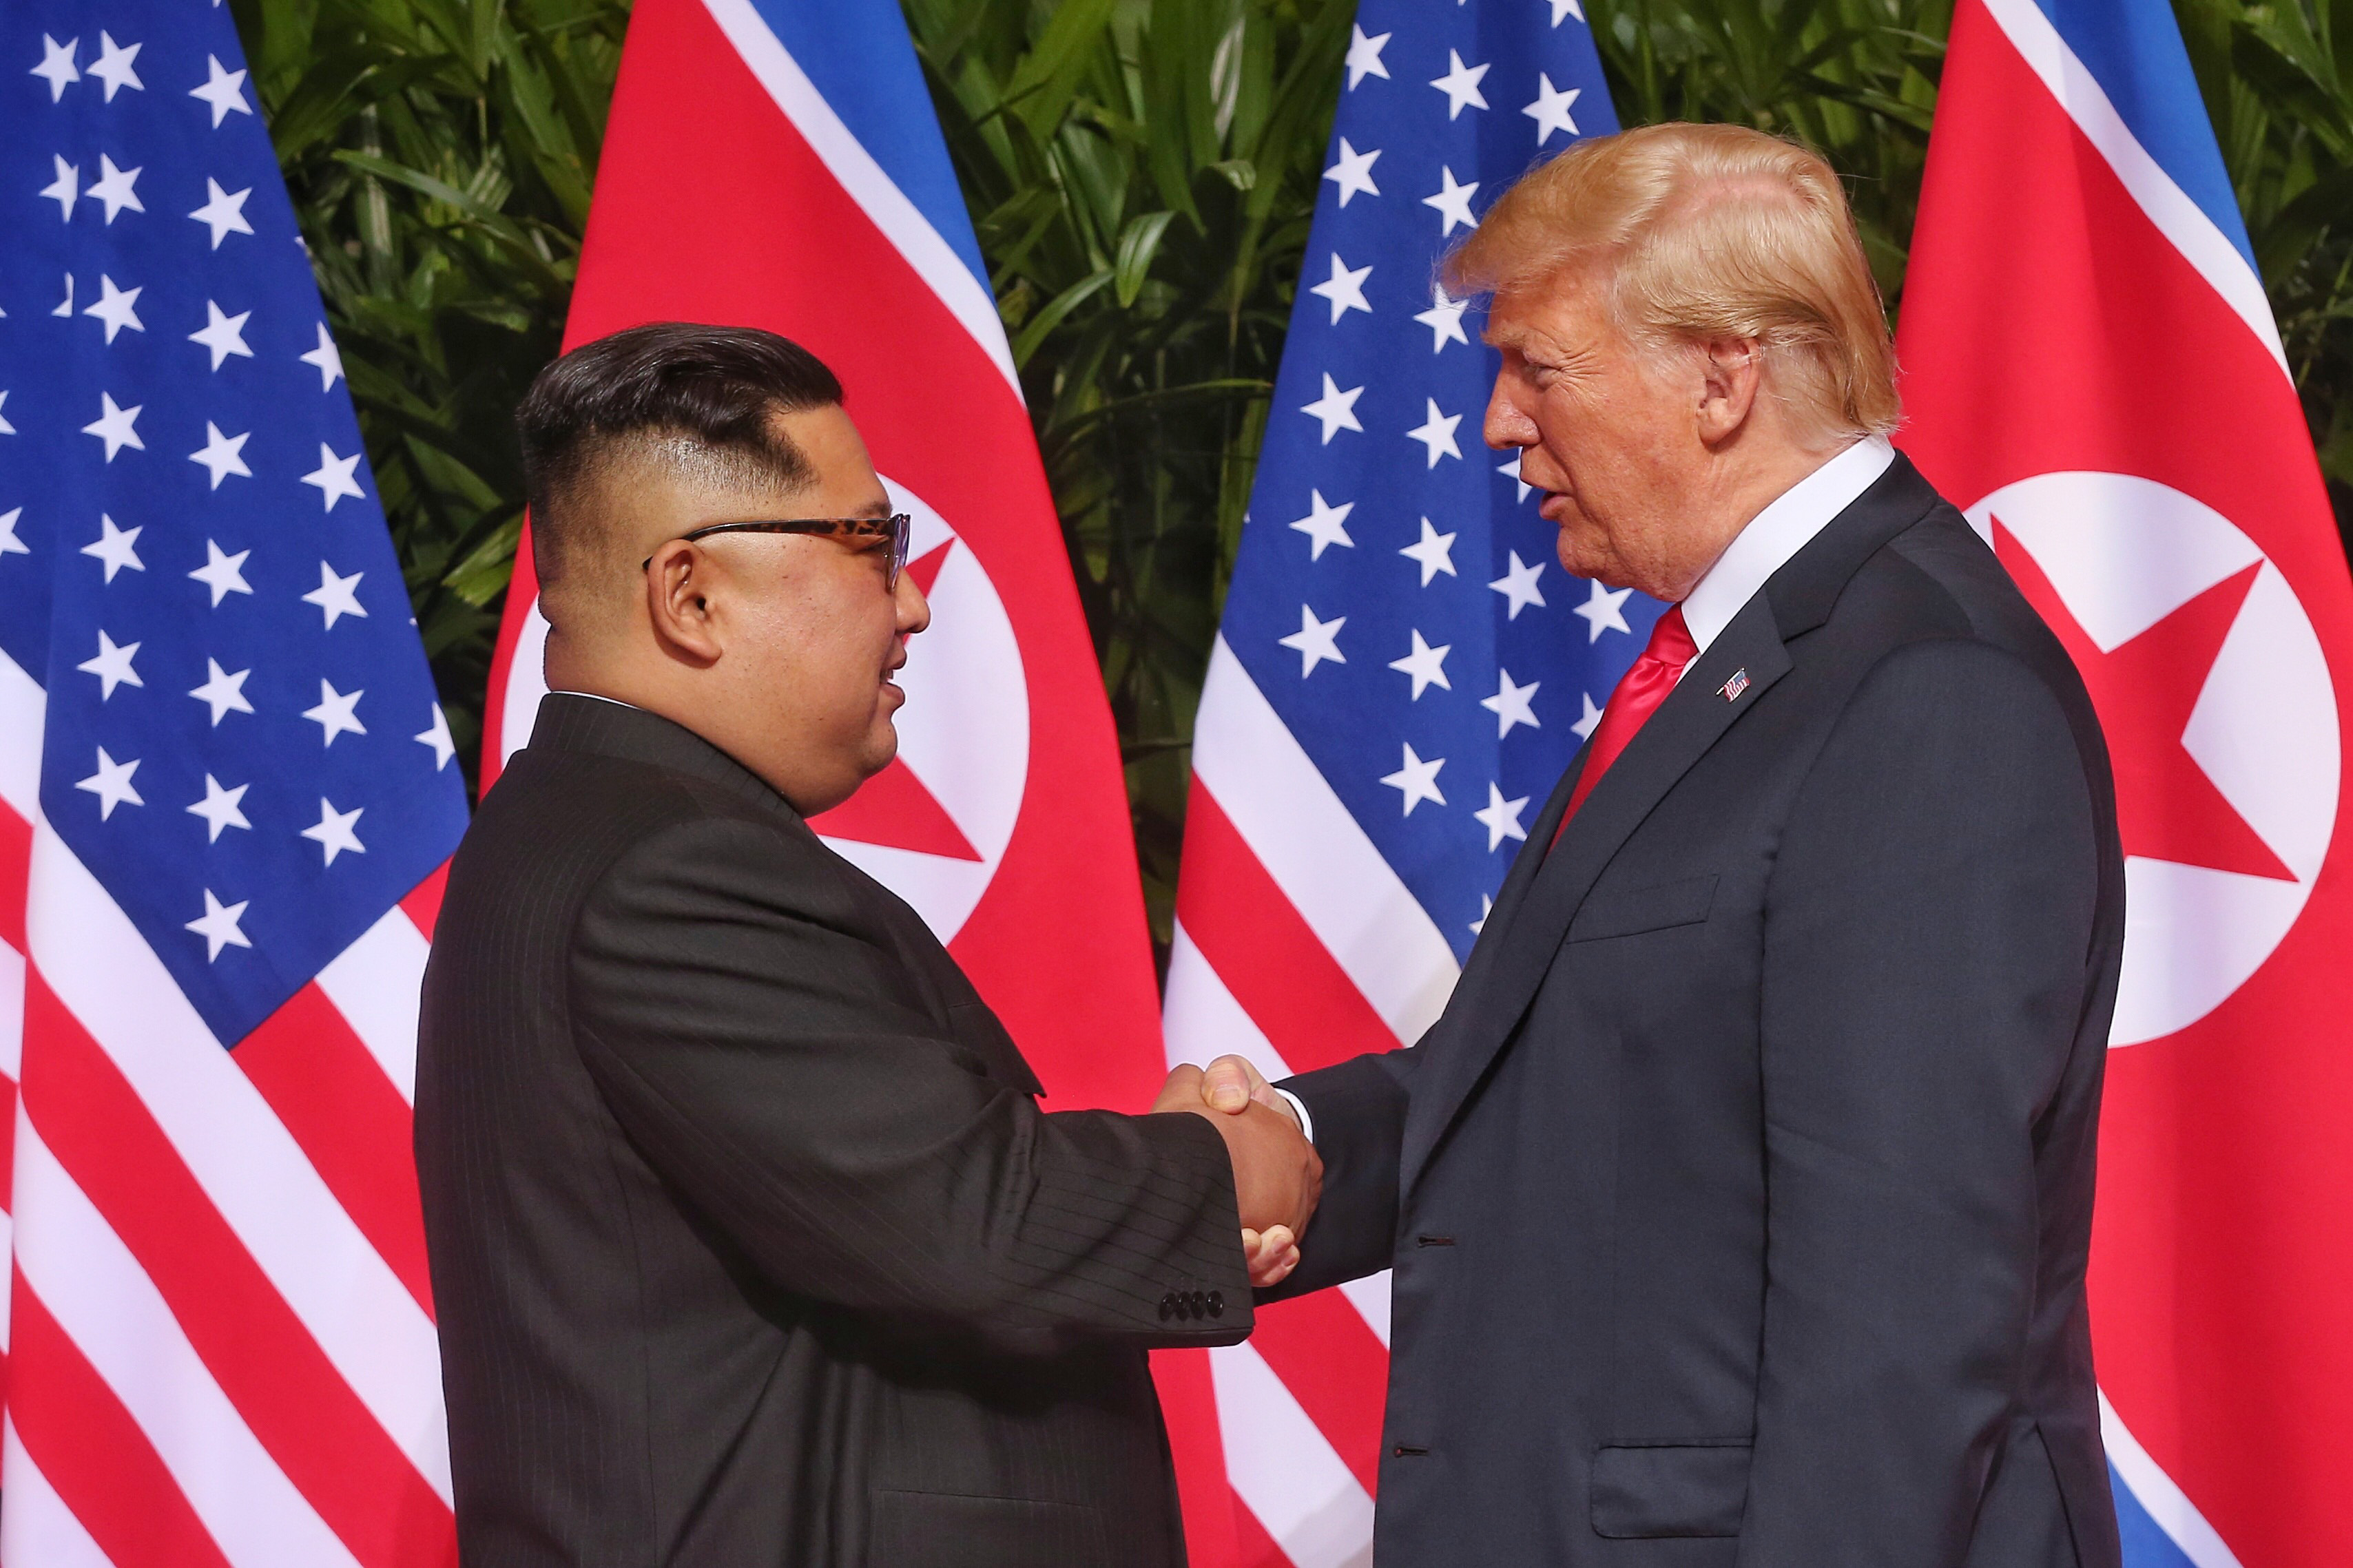 North Korean leader Kim Jong-un shakes hands with President Donald Trump during their historic summit on June 12, 2018 in Singapore.